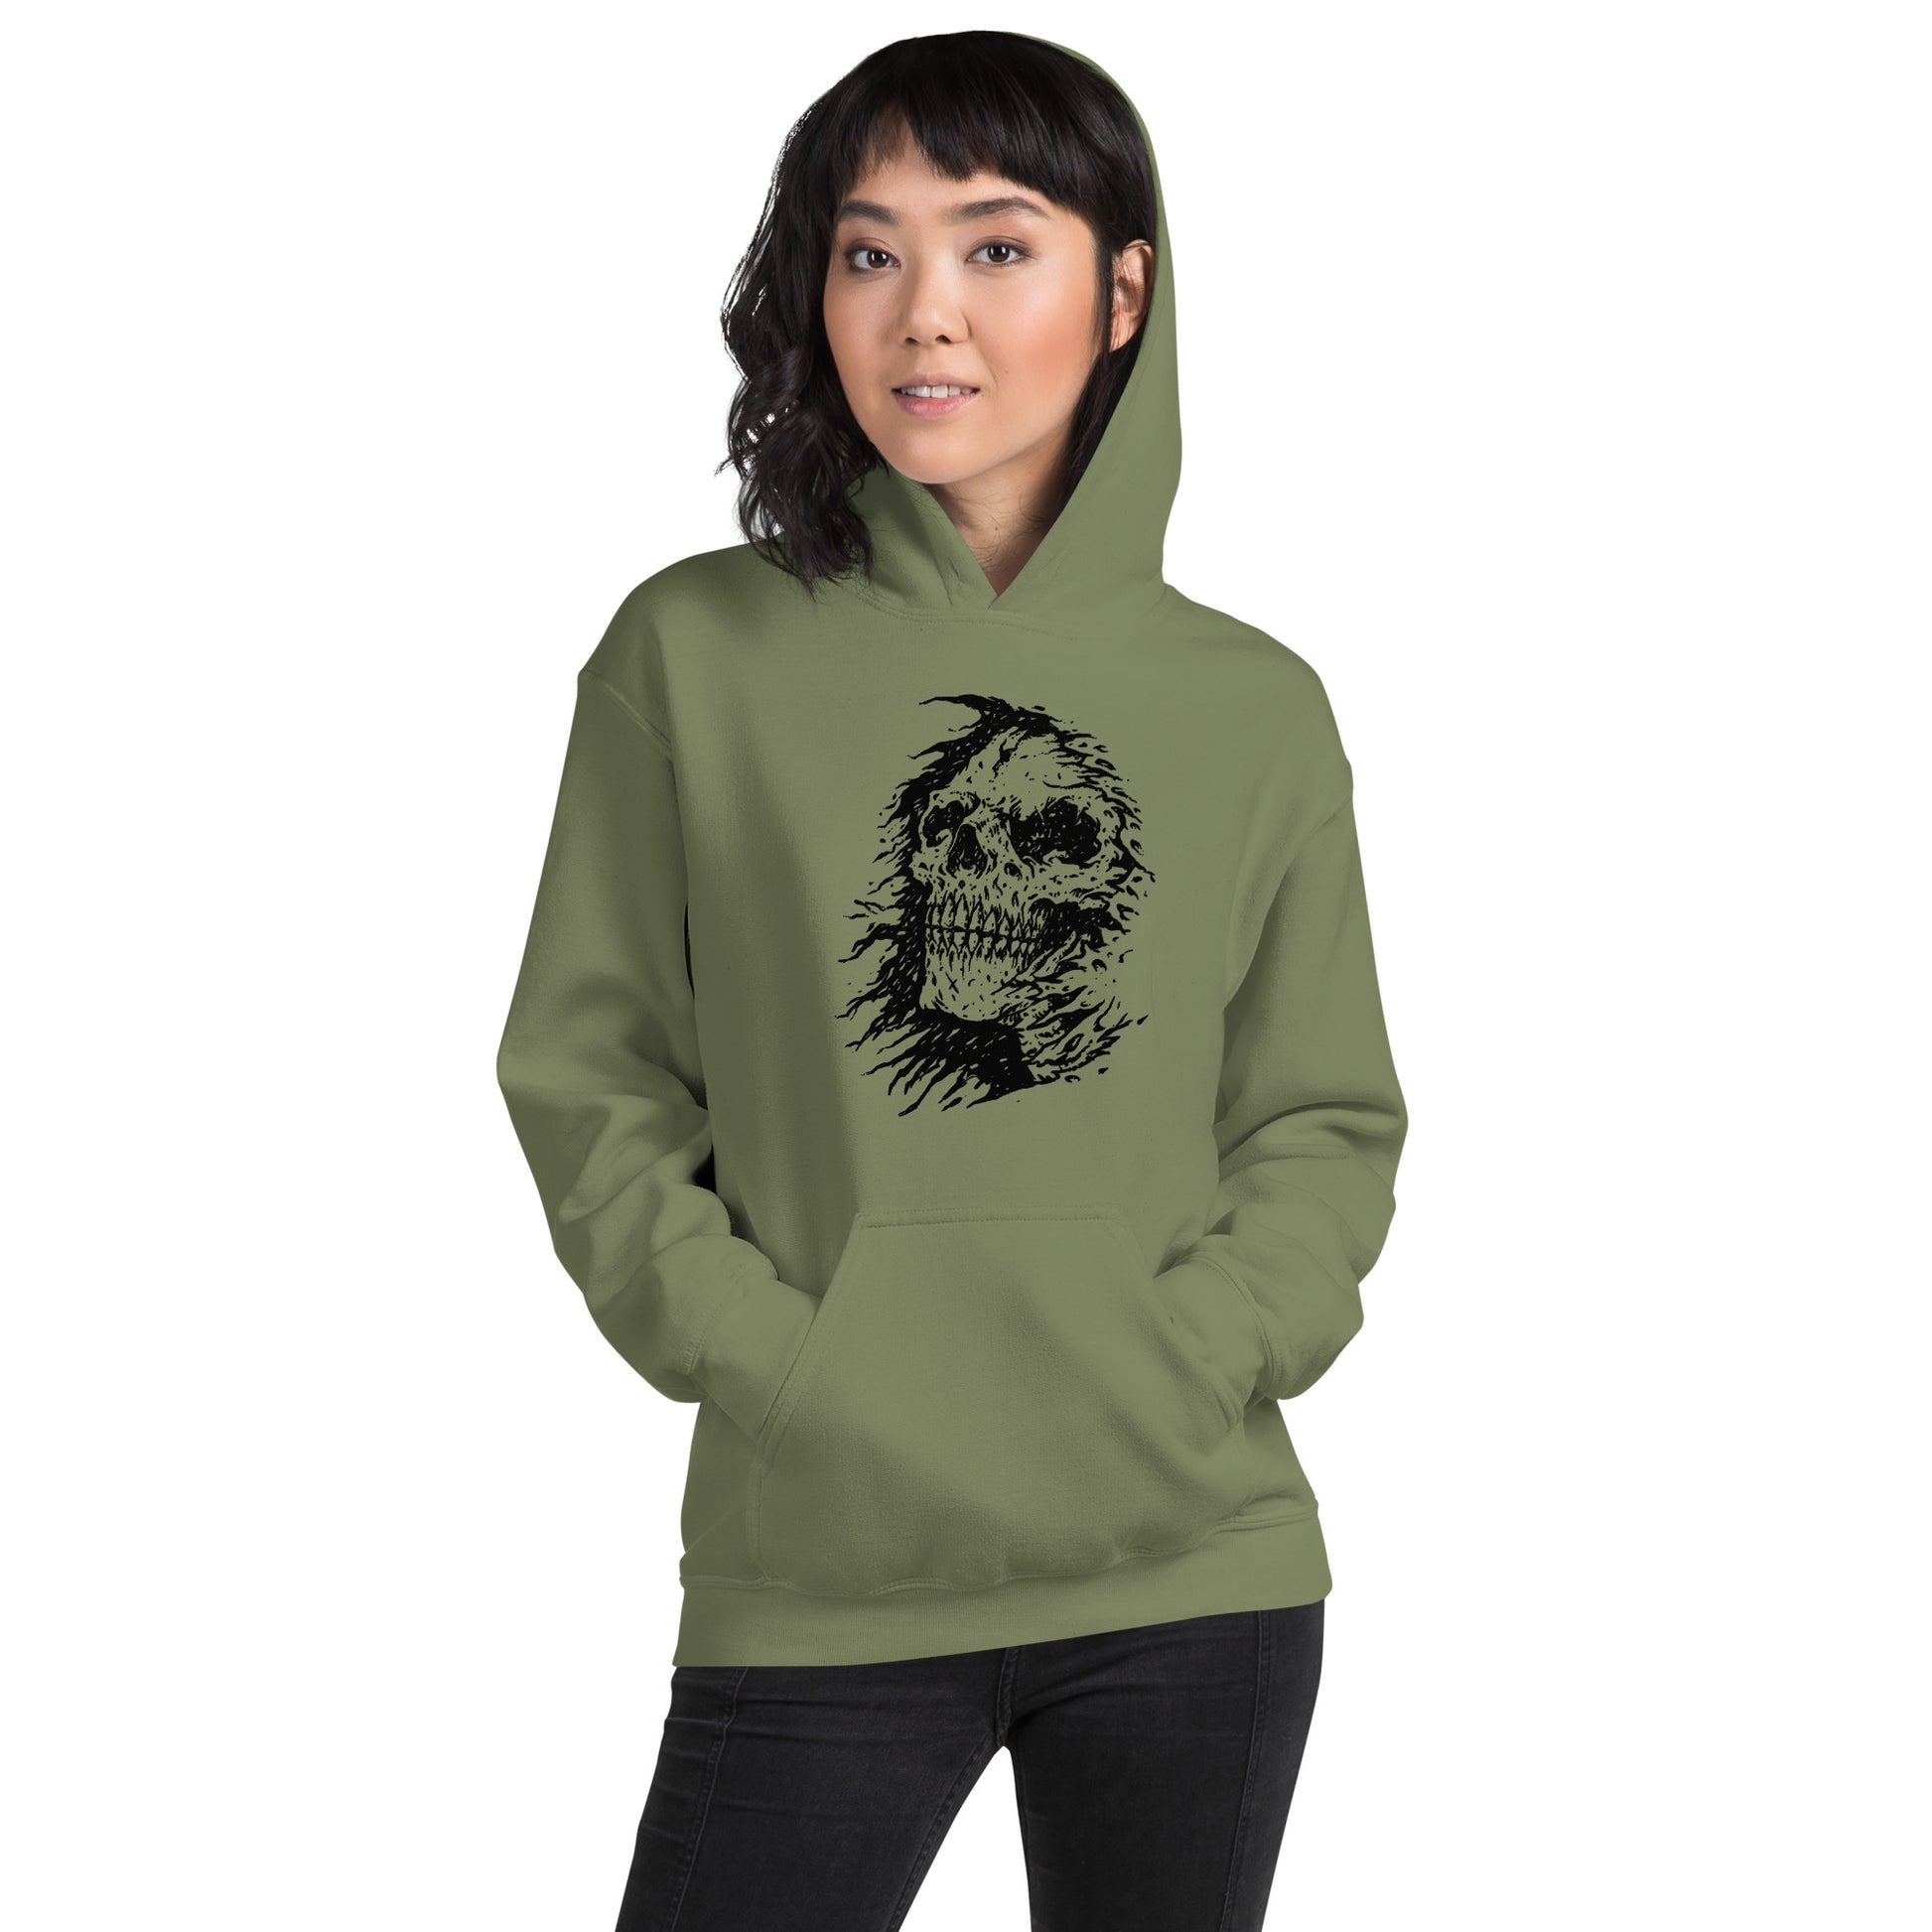 The Grim Reapers Skull Face Hoodie on a woman